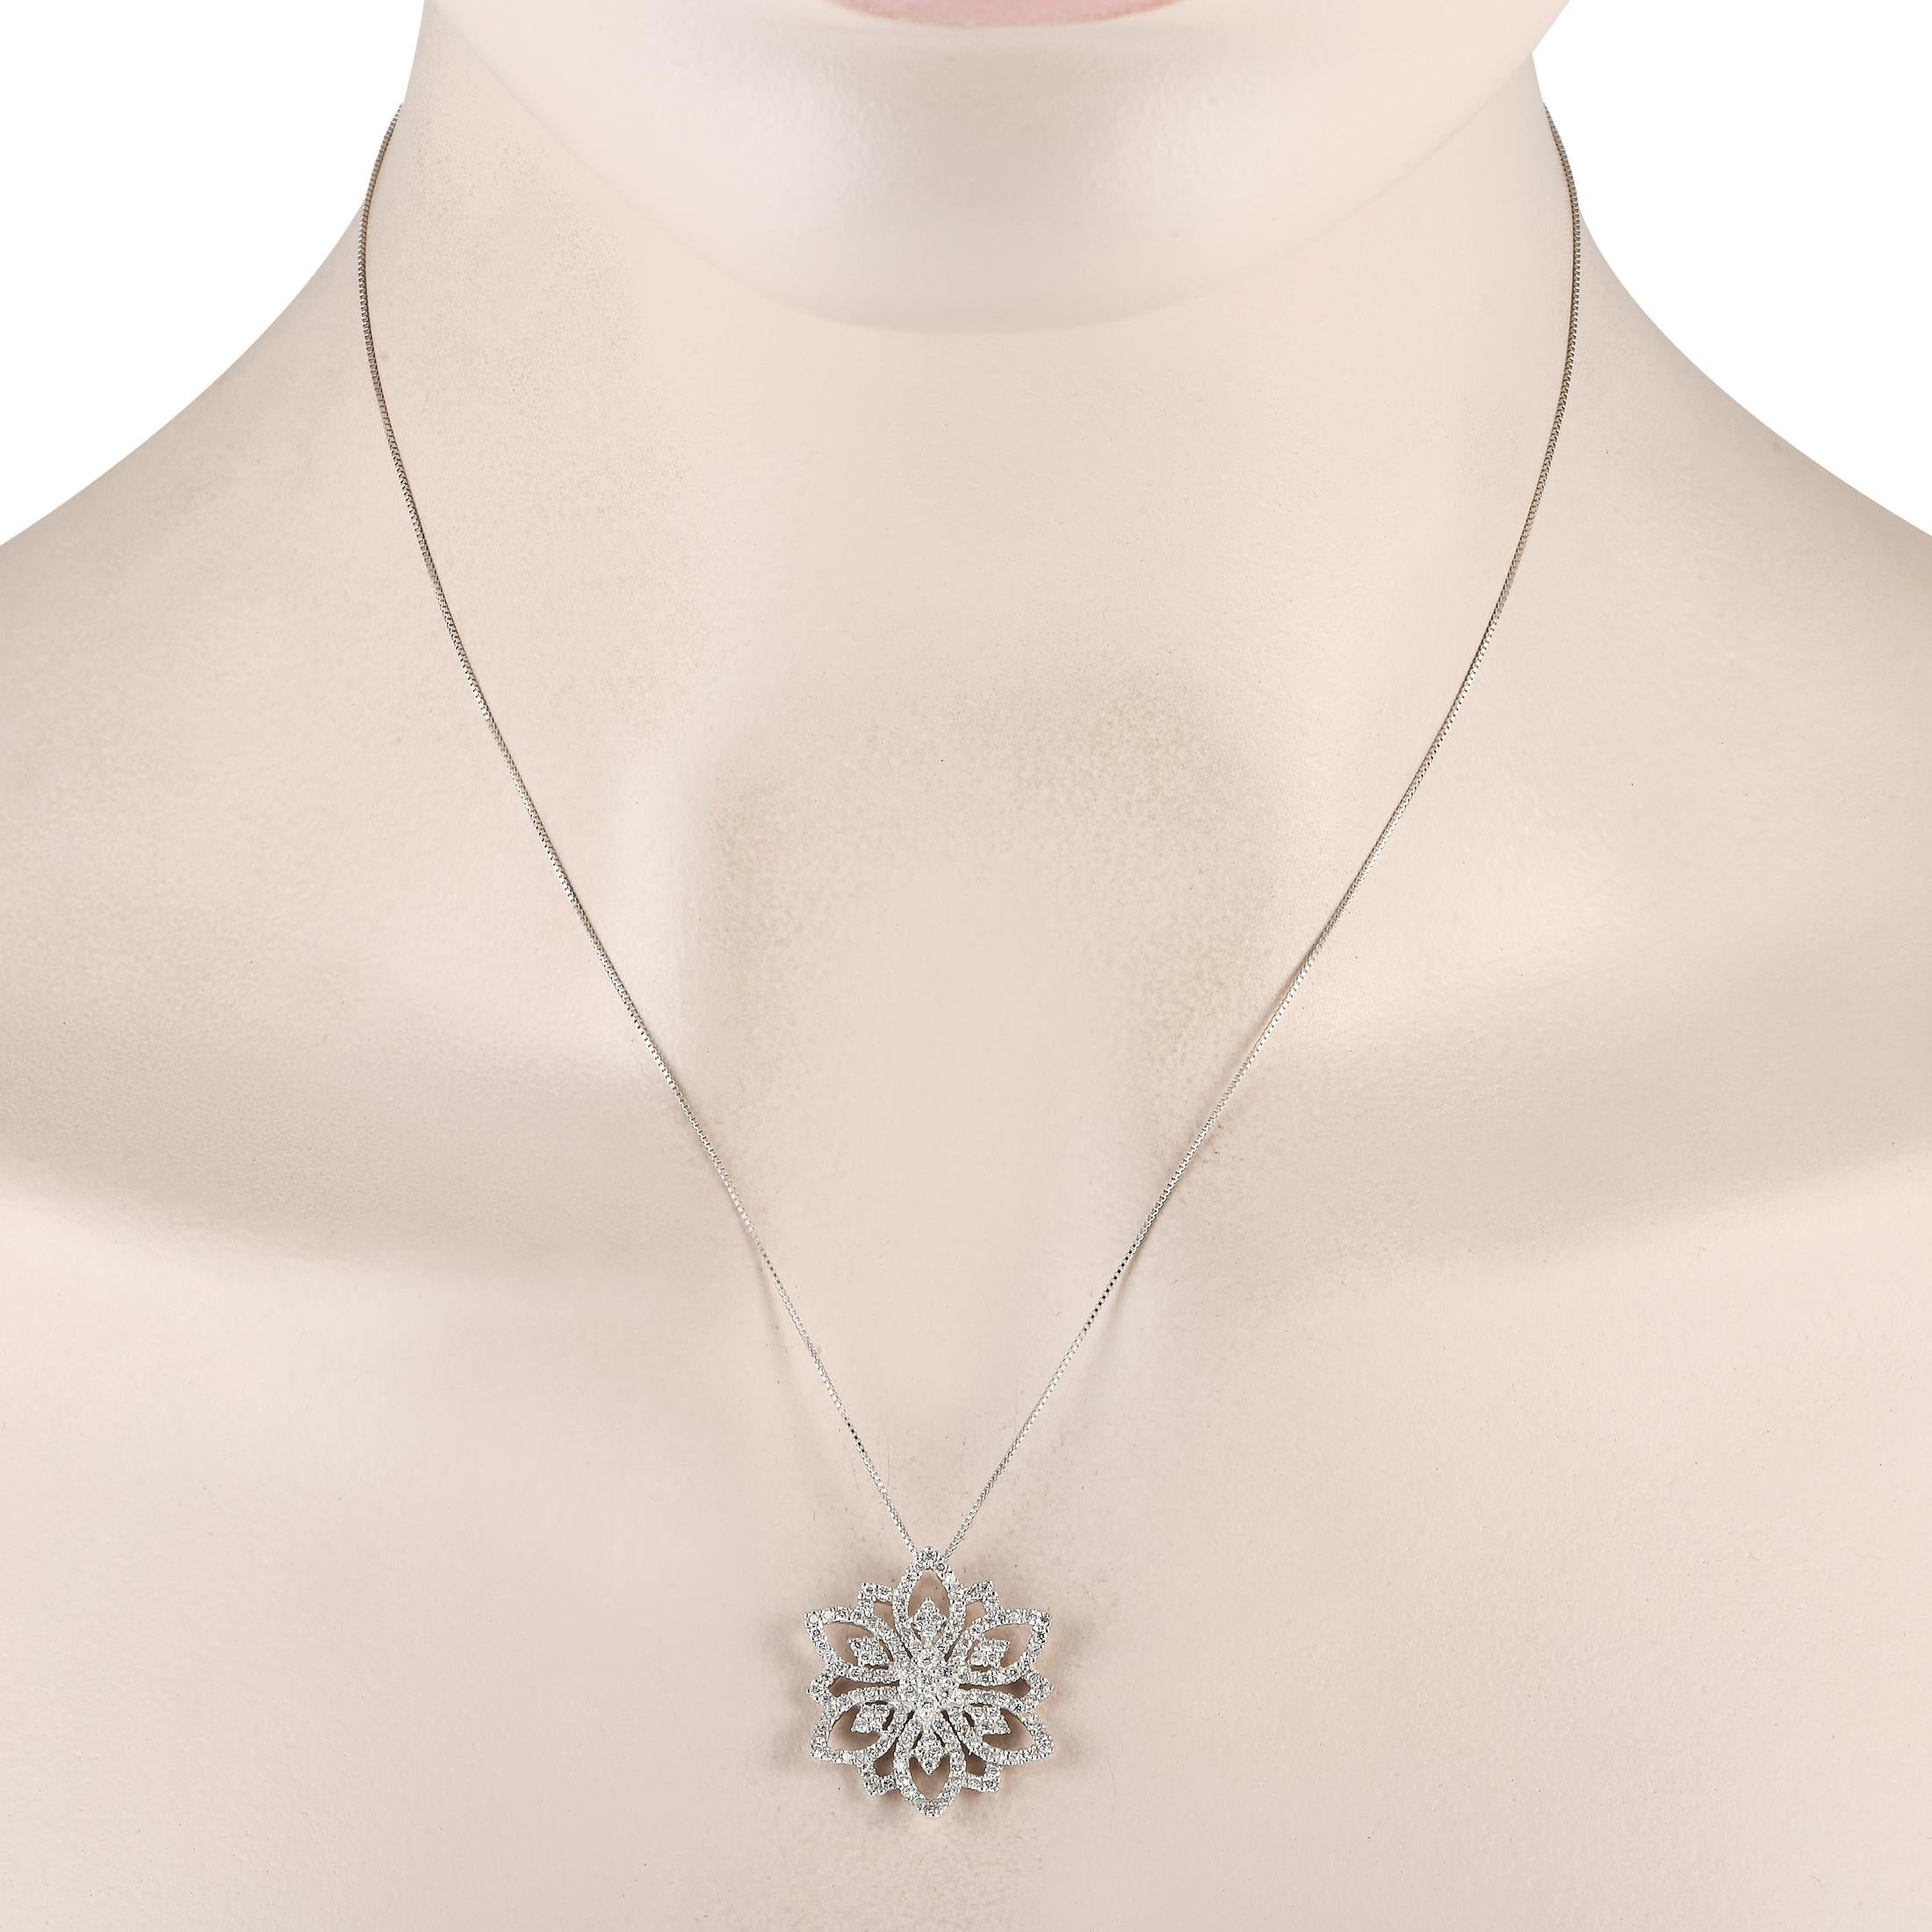 This diamond necklace is the perfect accessory to add a touch of romance to your ensembles. You'll love the understated elegance of the 1 x 1 flower-inspired pendant on the box chain necklace. Each contour is meticulously detailed with petite round